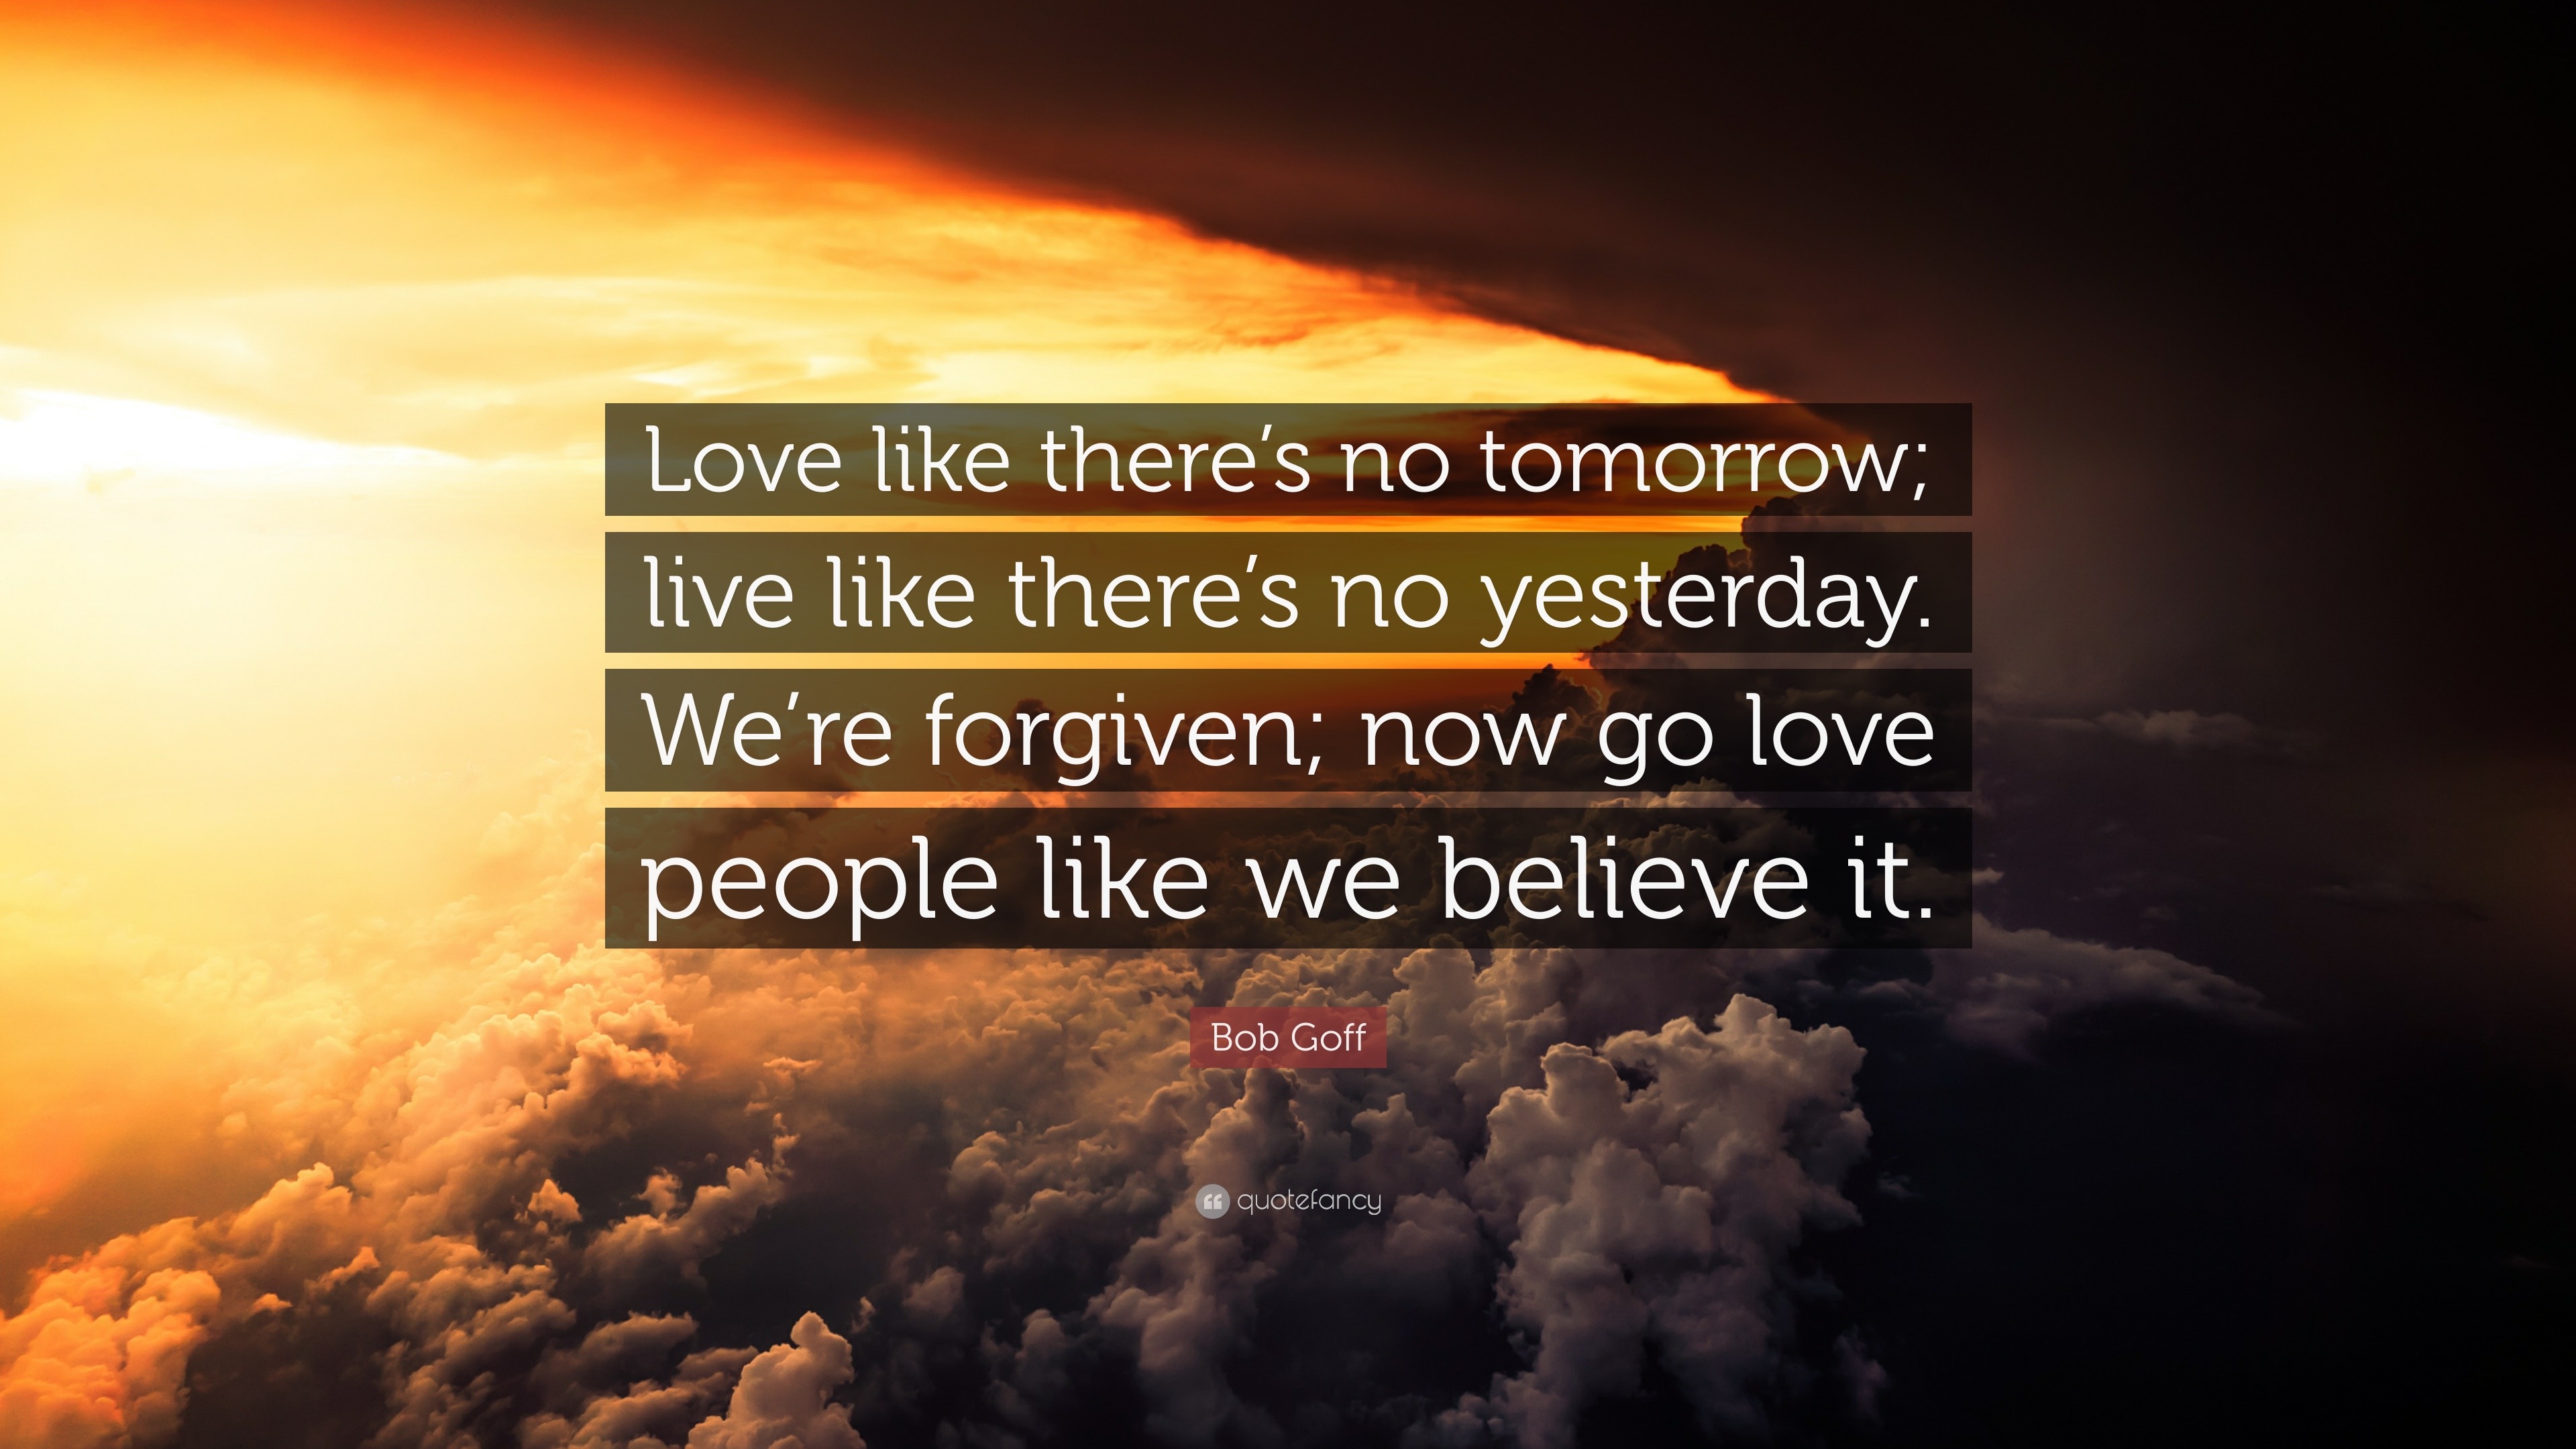 Bob Goff Quote Love Like There S No Tomorrow Live Like There S No Yesterday We Re Forgiven